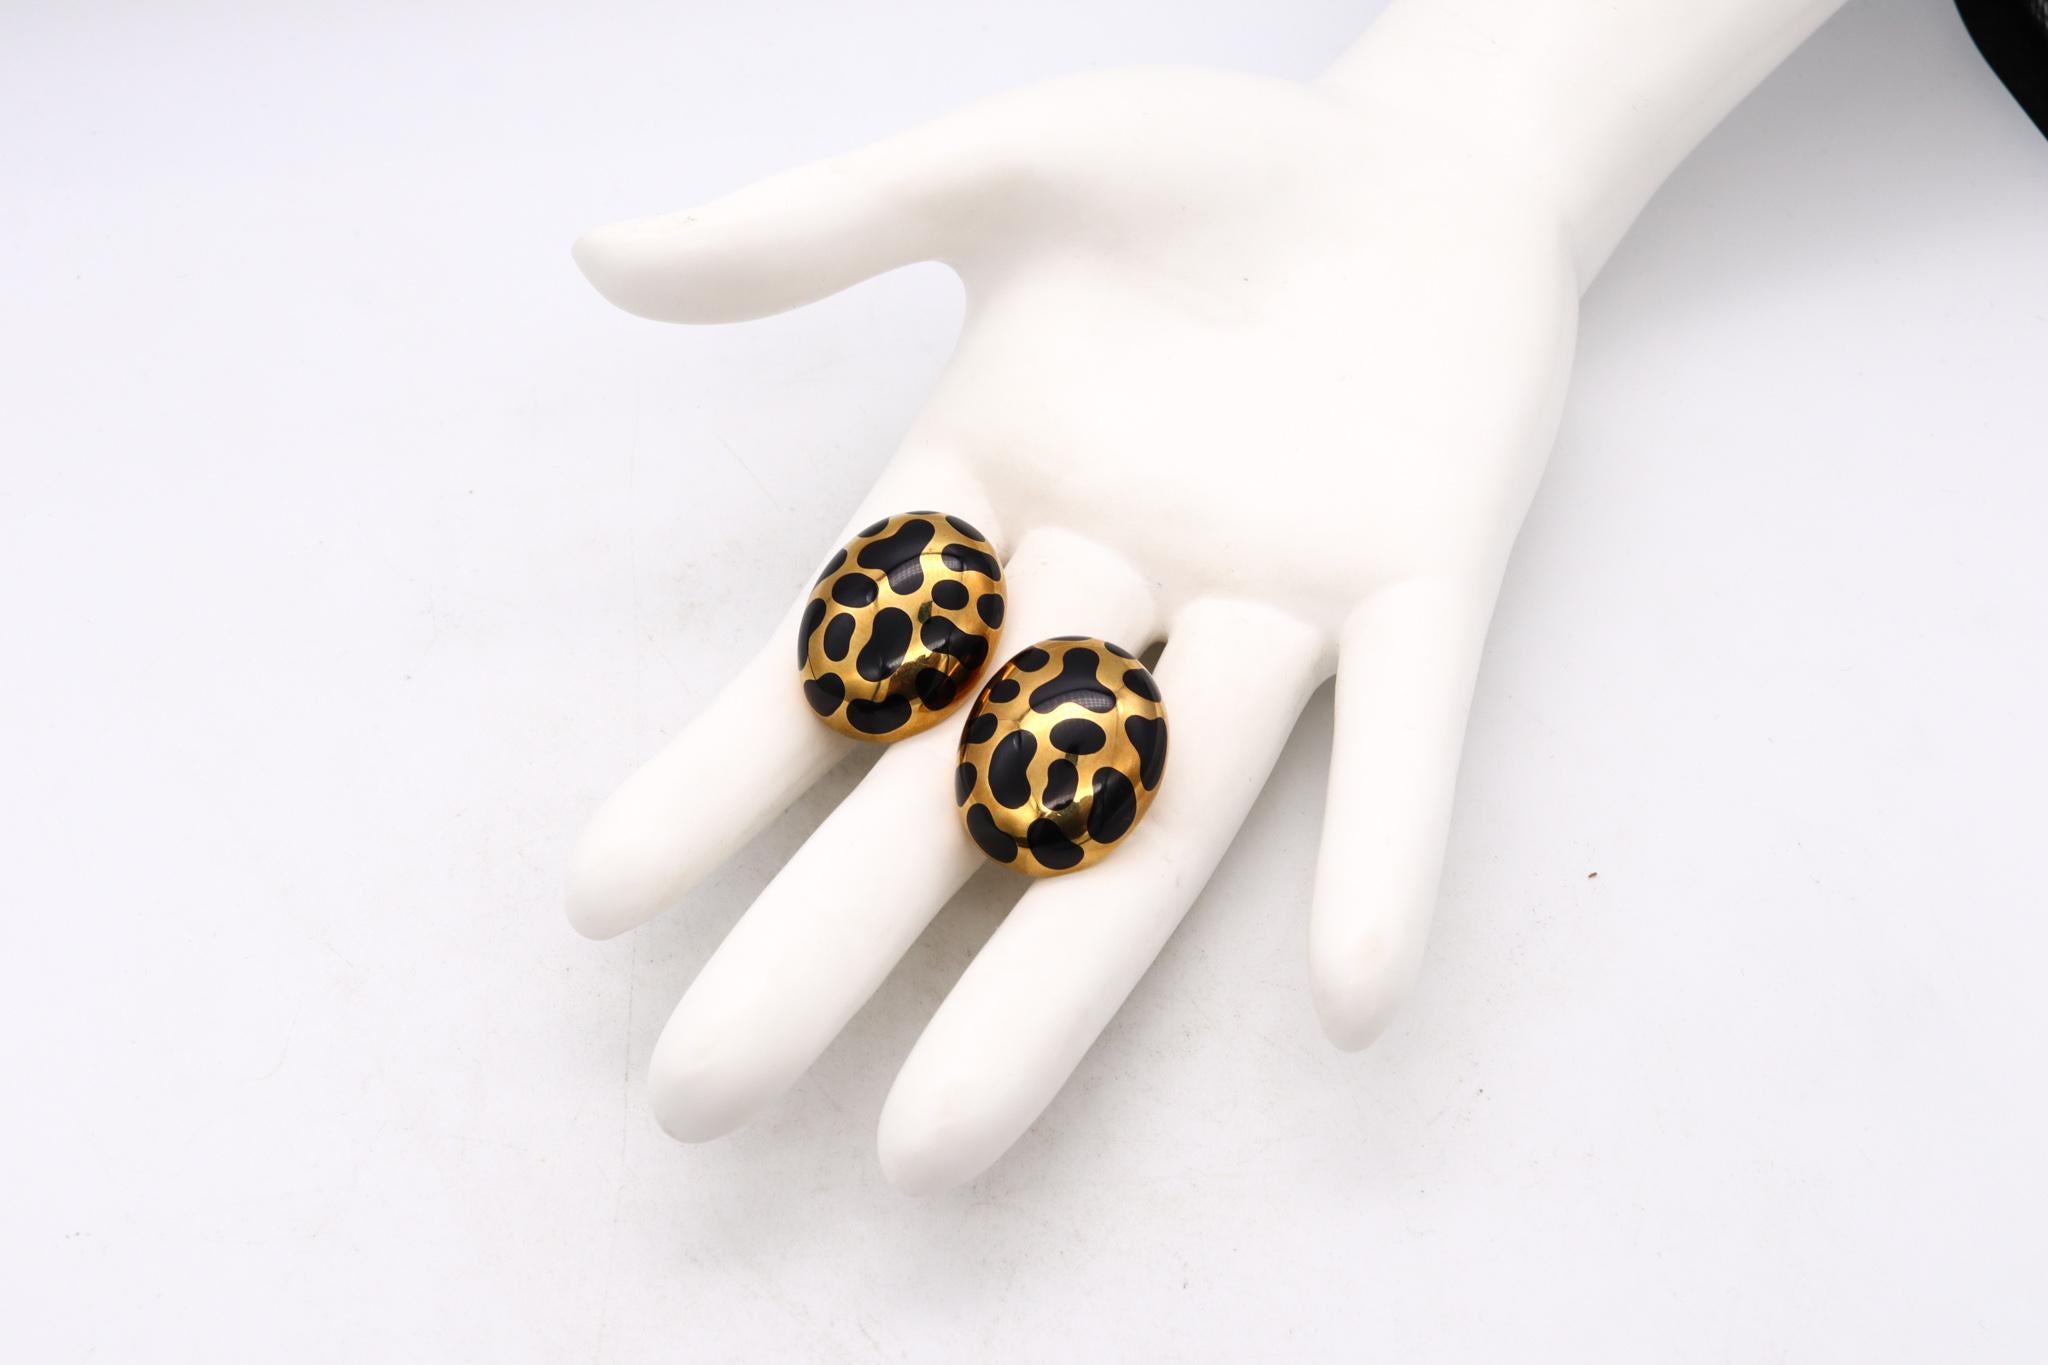 Modernist Angela Cummings 1985 Rare Allure Clip Earrings 18Kt Yellow Gold with Black Jade